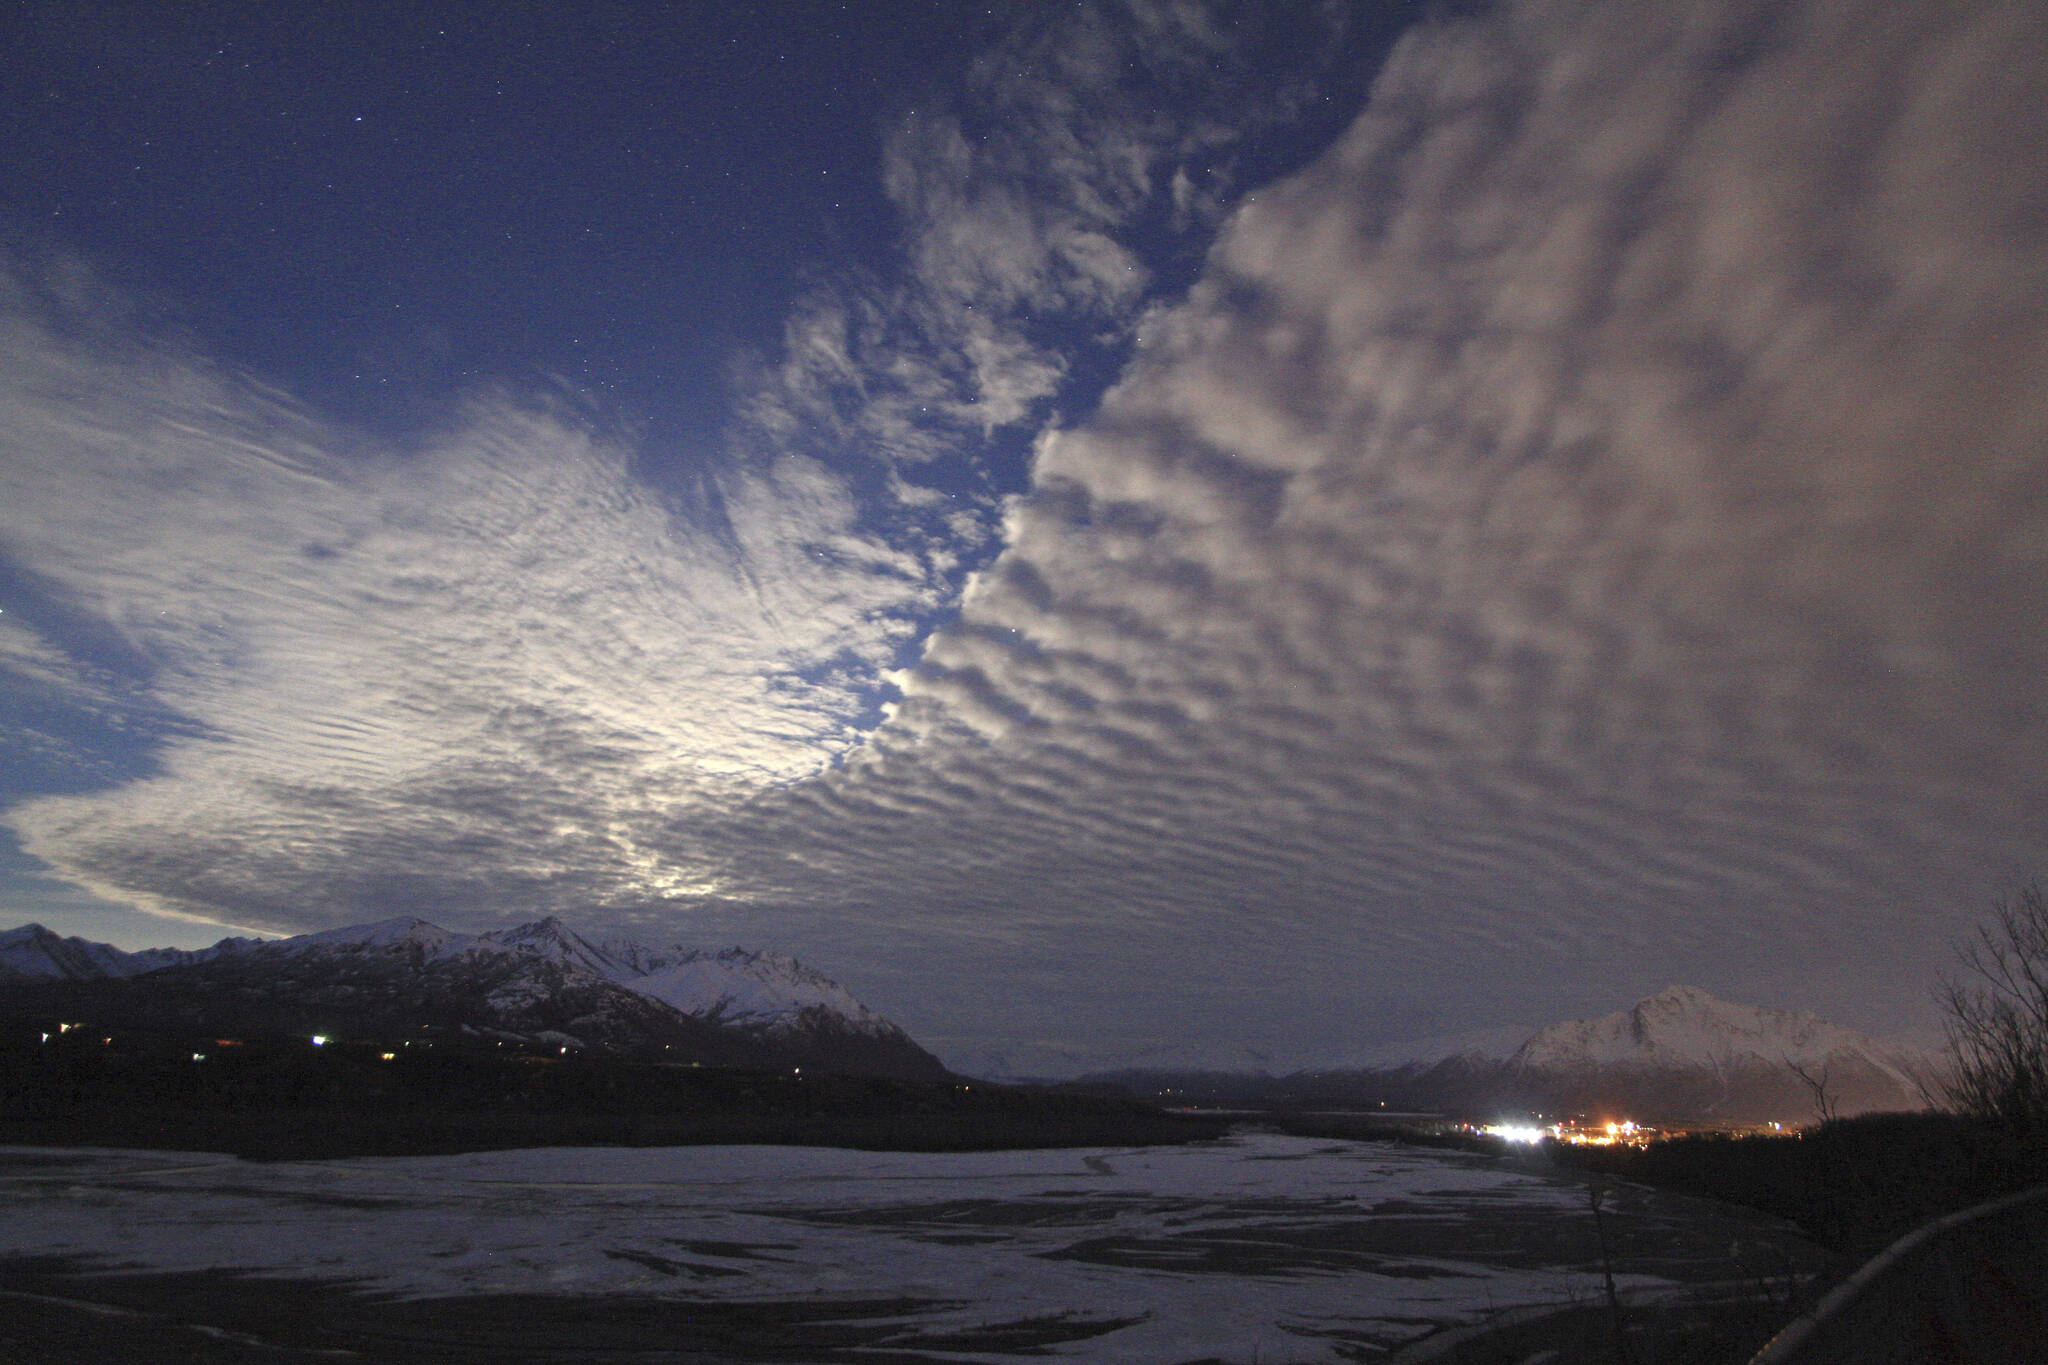 Clouds over the sky over Lazy Mountain and the Matanuska River on March 23, 2016, in Palmer, Alaska. Lights from downtown Palmer and Pioneer Peak can be seen in the lower right. Some critics say a new map of state political boundaries drawn following the last Census short-changes the fast-growing area north of Anchorage seen as a hotbed of conservatism. (AP Photo/Dan Joling, File)